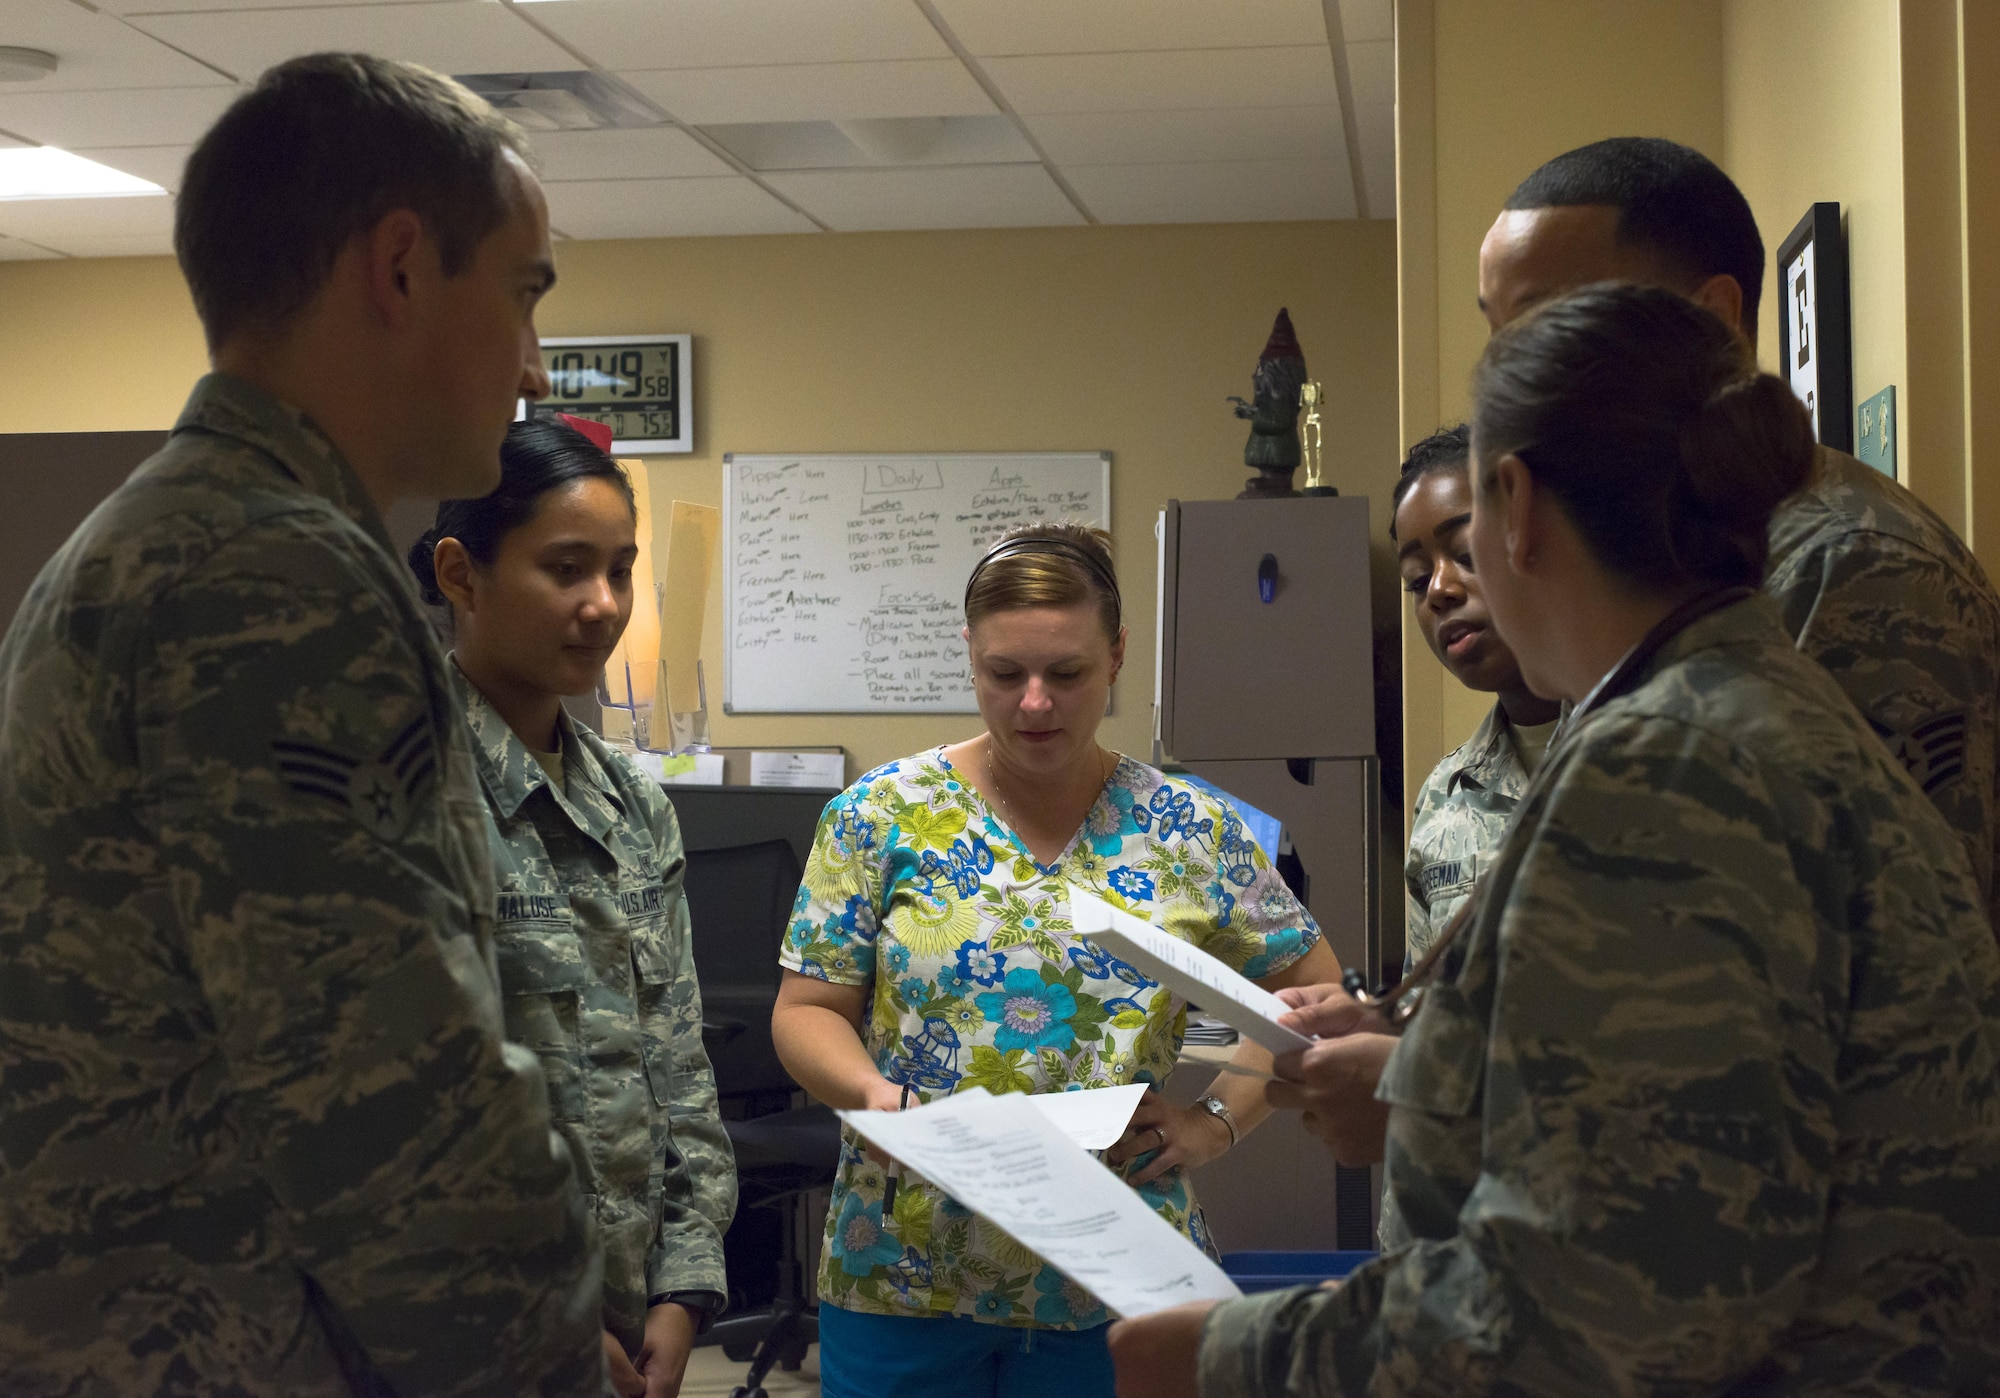 Aerospace medical technicians from the 6th Medical Group meet with primary care managers at the Family Health Clinic during a medical huddle. Medical huddles are conducted at least twice-daily to ensure patients receive the best care at MacDill Air Force Base, Fla., Jan. 3, 2017. (U.S. Air Force photo by Senior Airman Bradley Tipton)